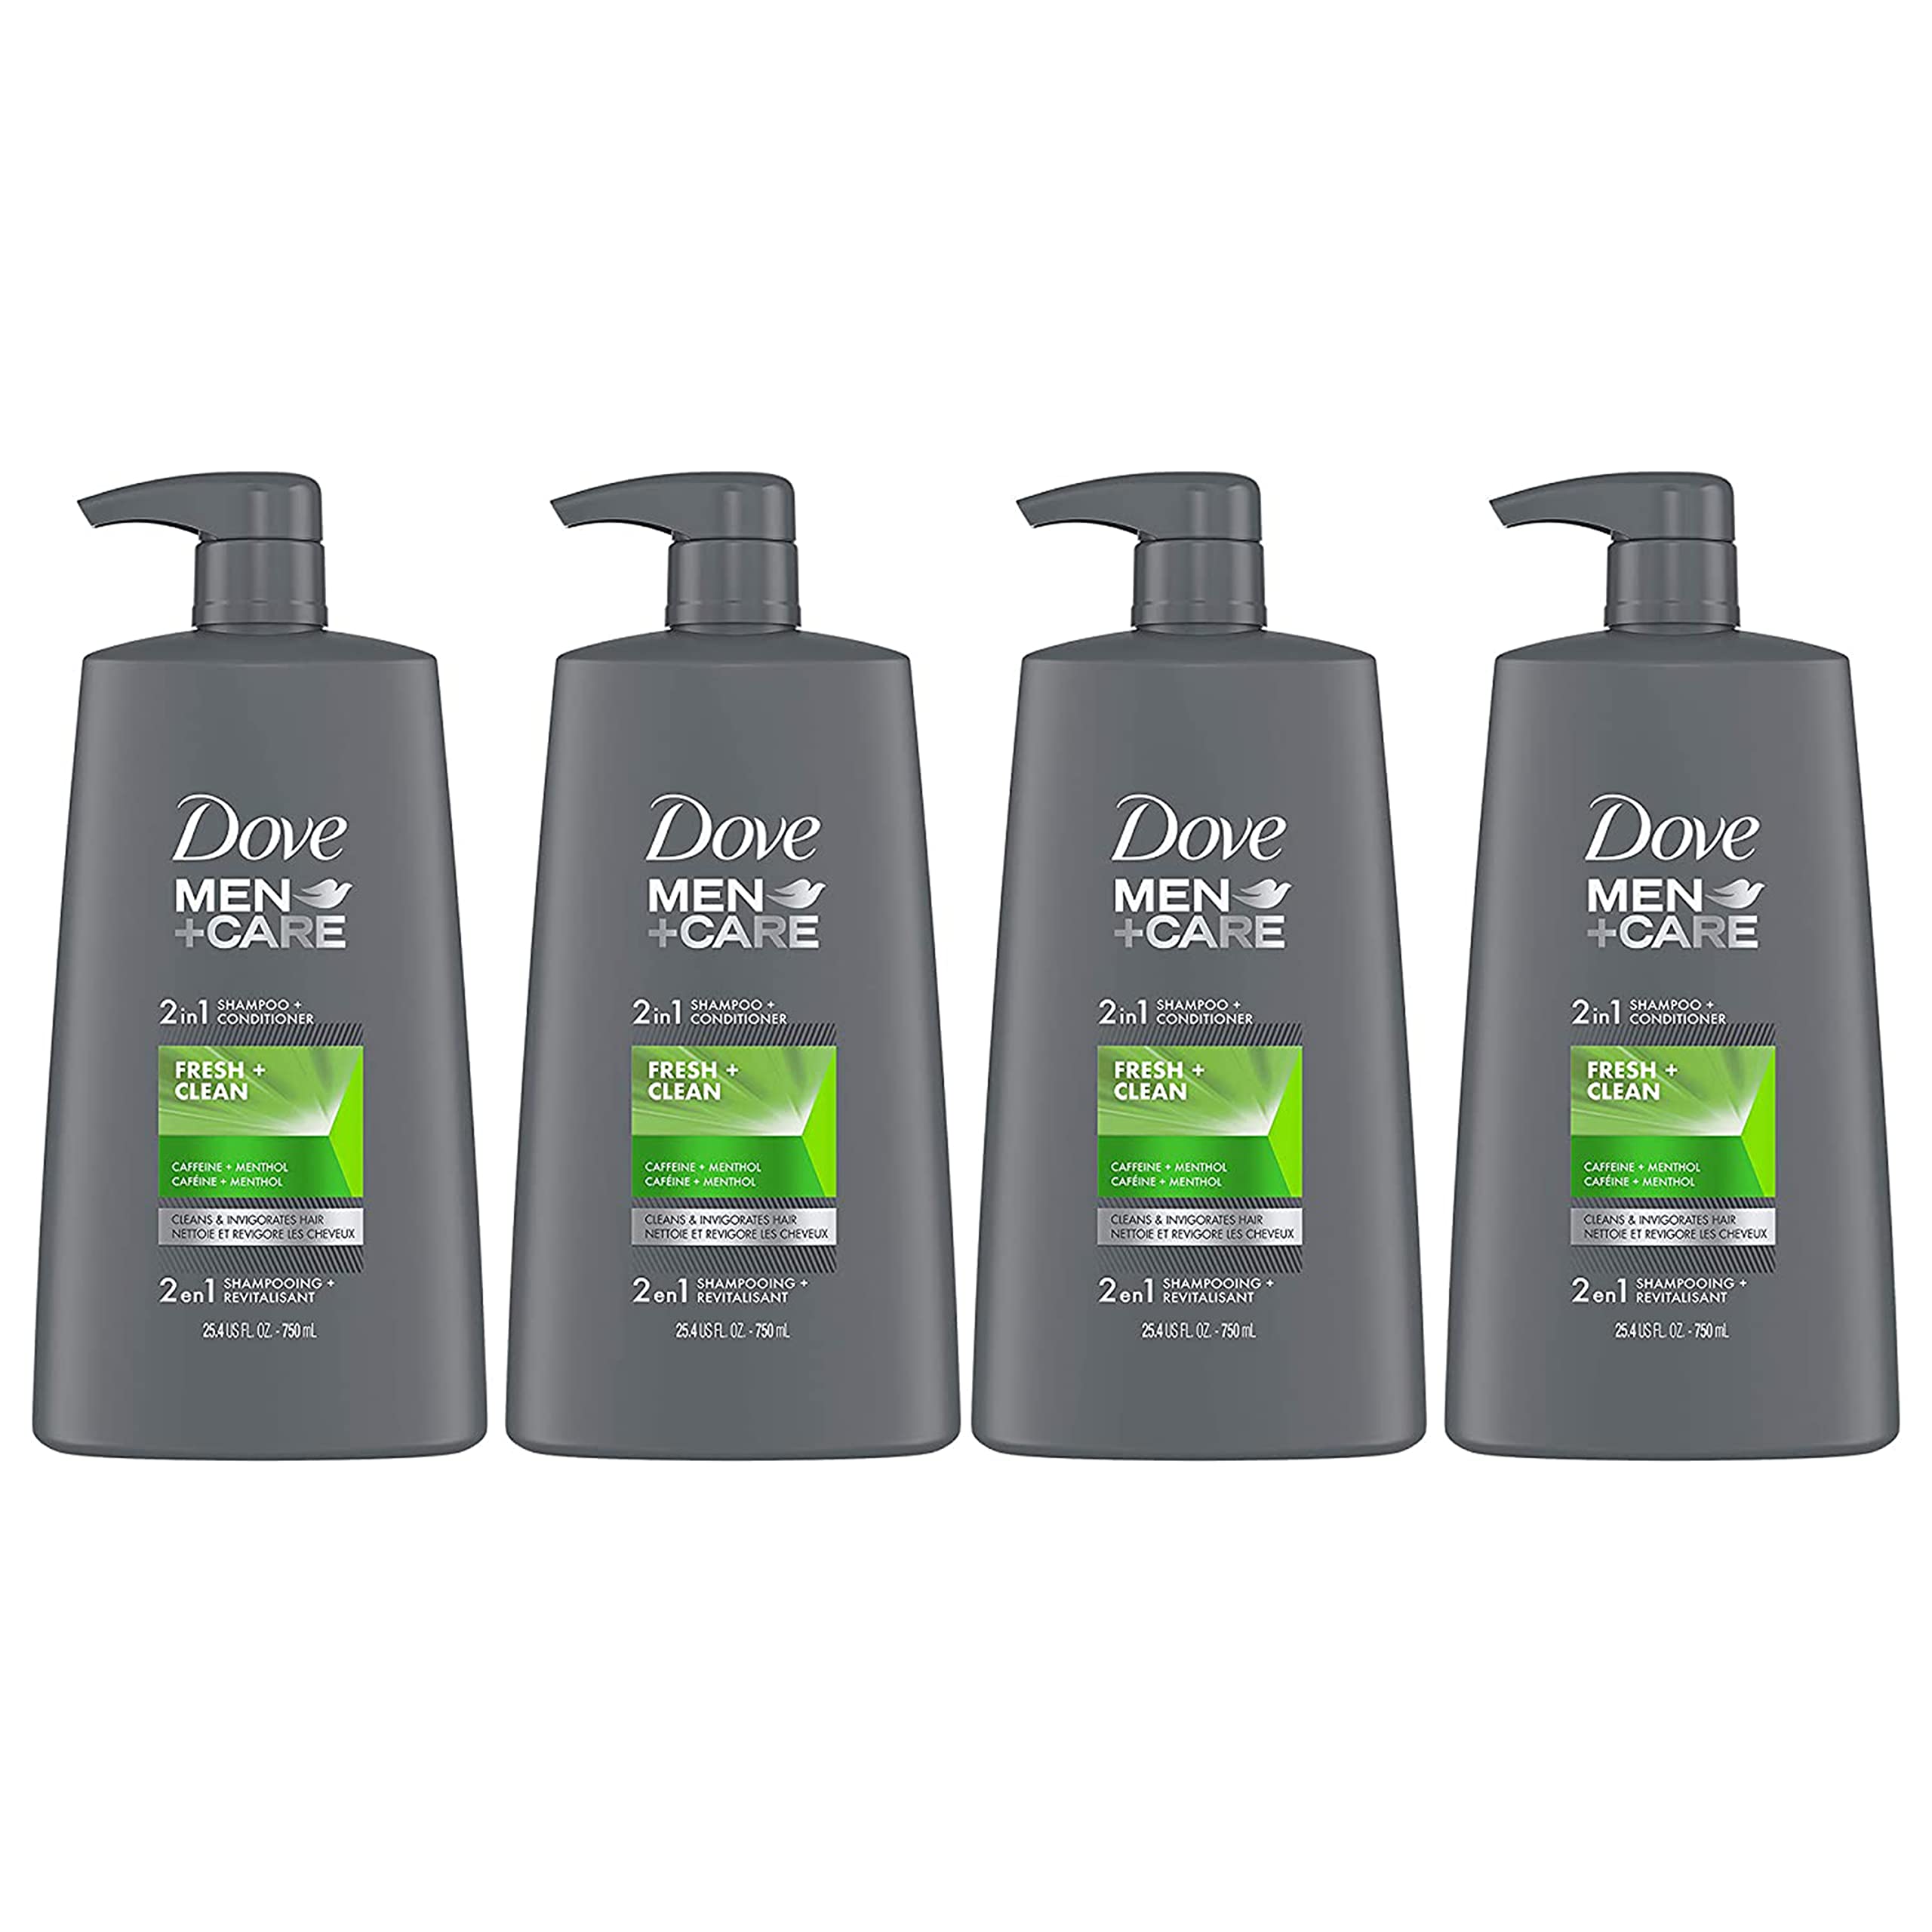 DOVE MEN + CARE 2 in 1 Shampoo and Conditioner Fresh and Clean 4 Count Fortifies Hair Helps Strengthen Hair 25.4 oz